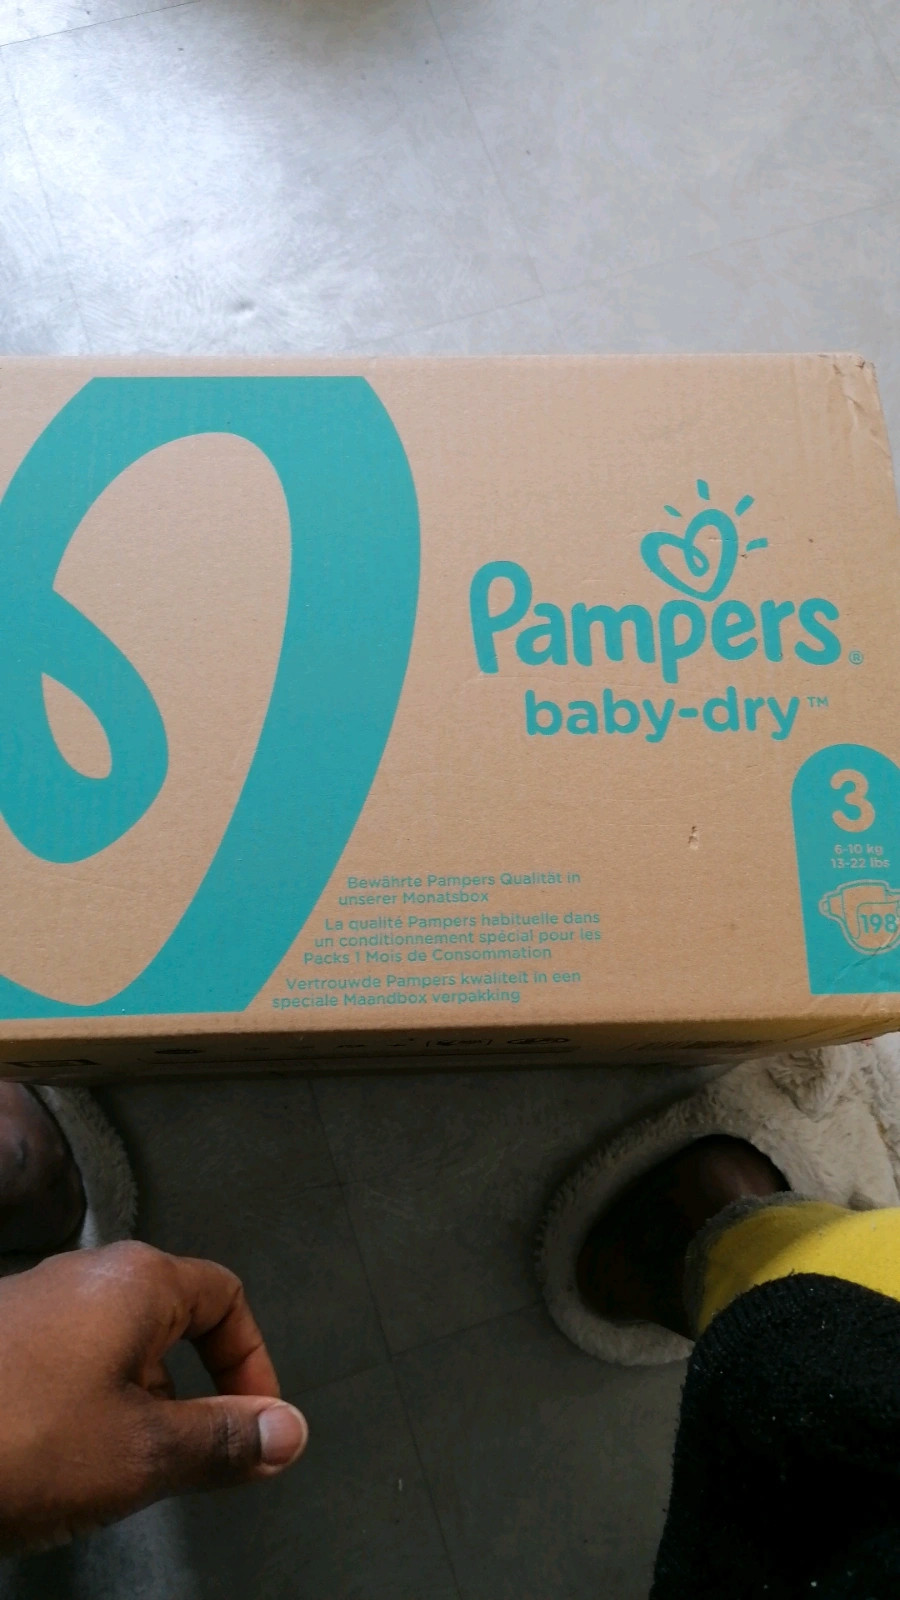 Pampers Couches Taille 3 (6-10 kg), Baby-Dry, 198 Couches Bébé